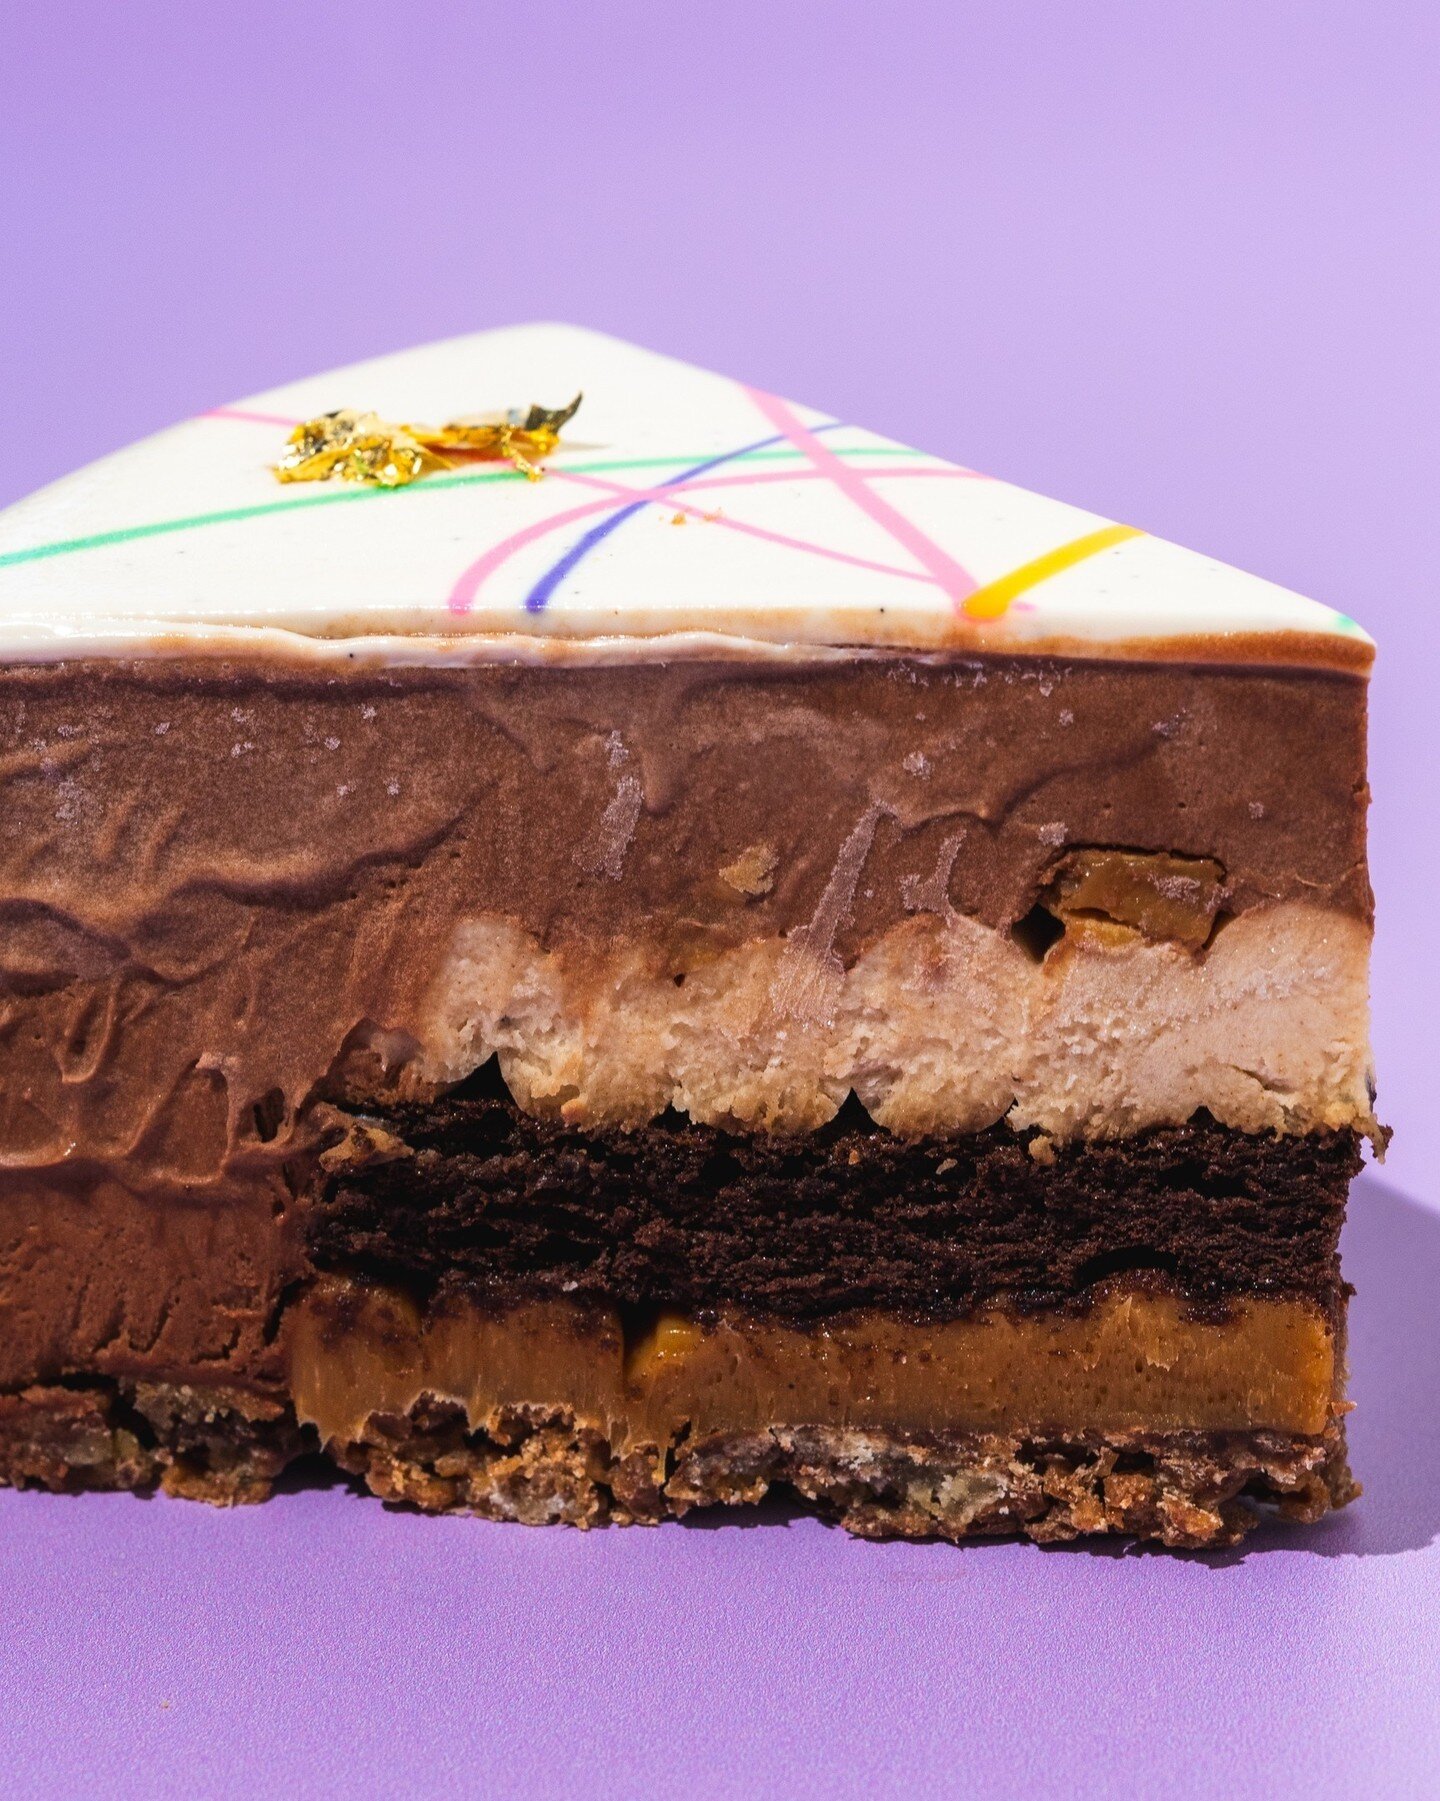 Springtime Rocky Road ~ decadent layers of caramel chocolate crumble, salted caramel, espresso sponge, almond espresso cremeux, almond and milk chocolate mousse, topped with a colourful, springtime glaze. Available by the slice or whole cake through 